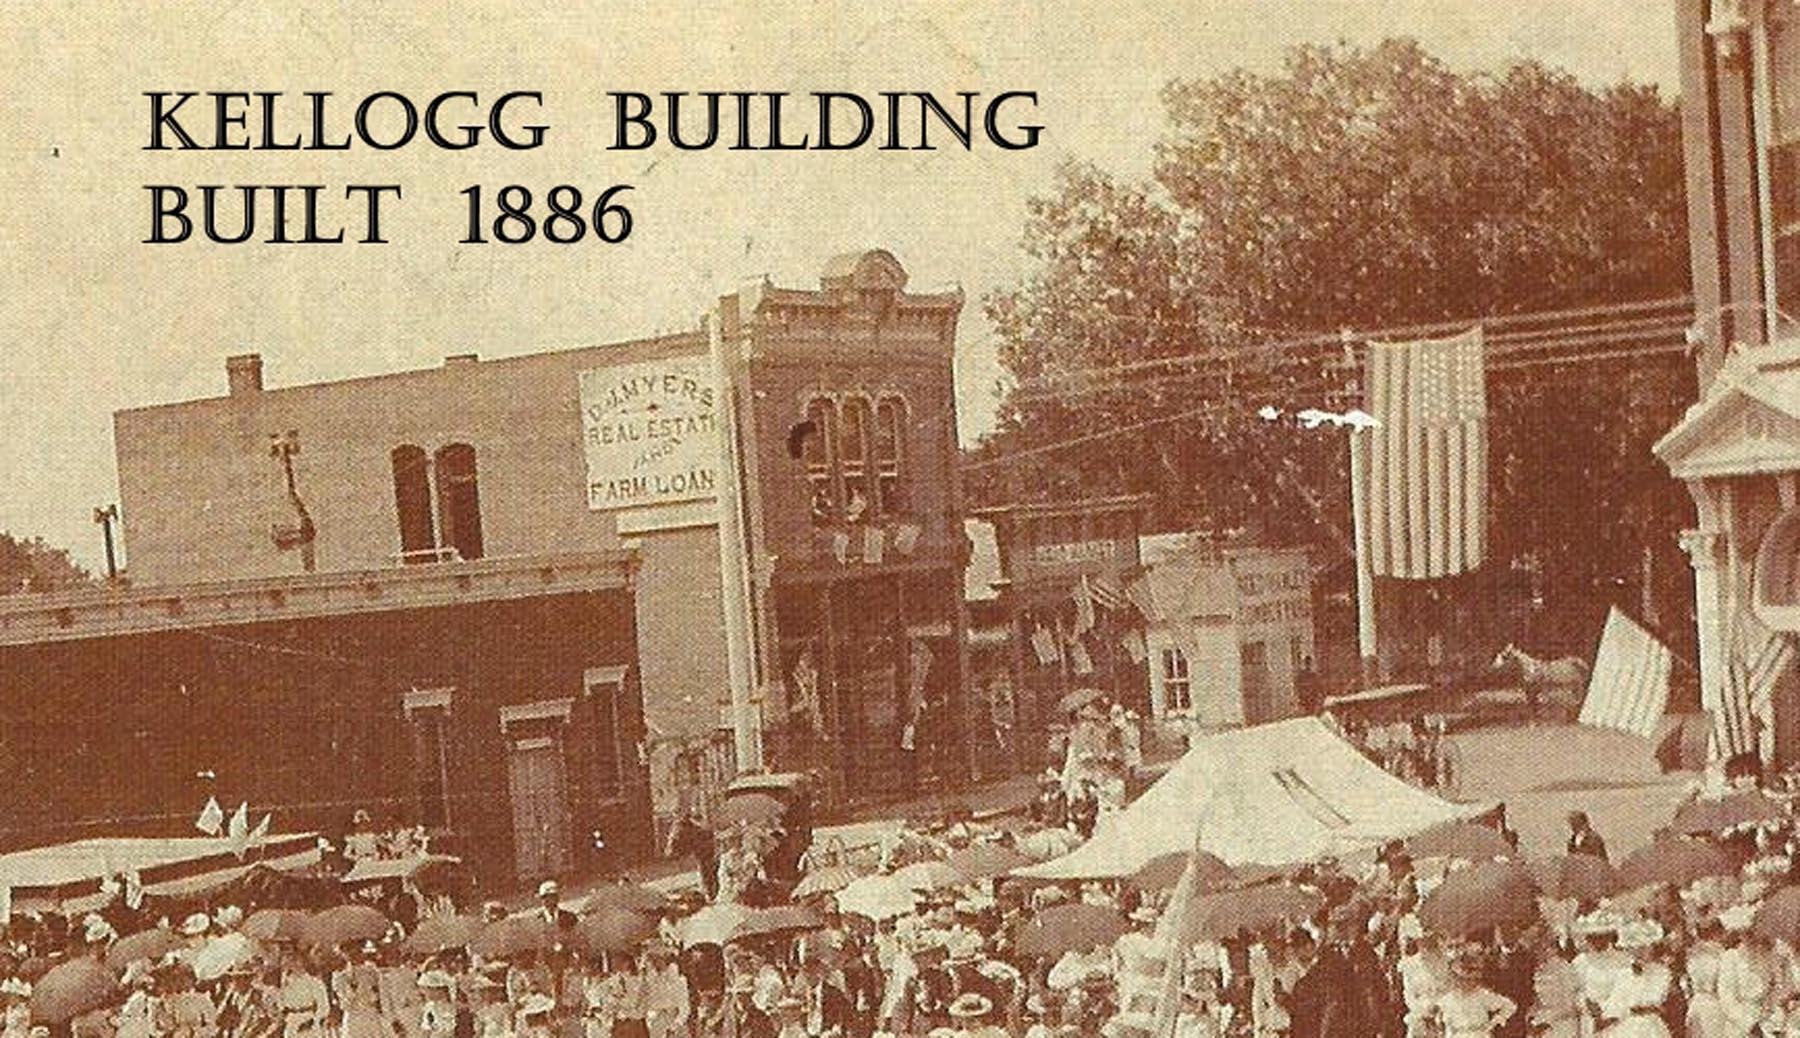 kellogg building shown in early 1900s parade - labeled- close-up